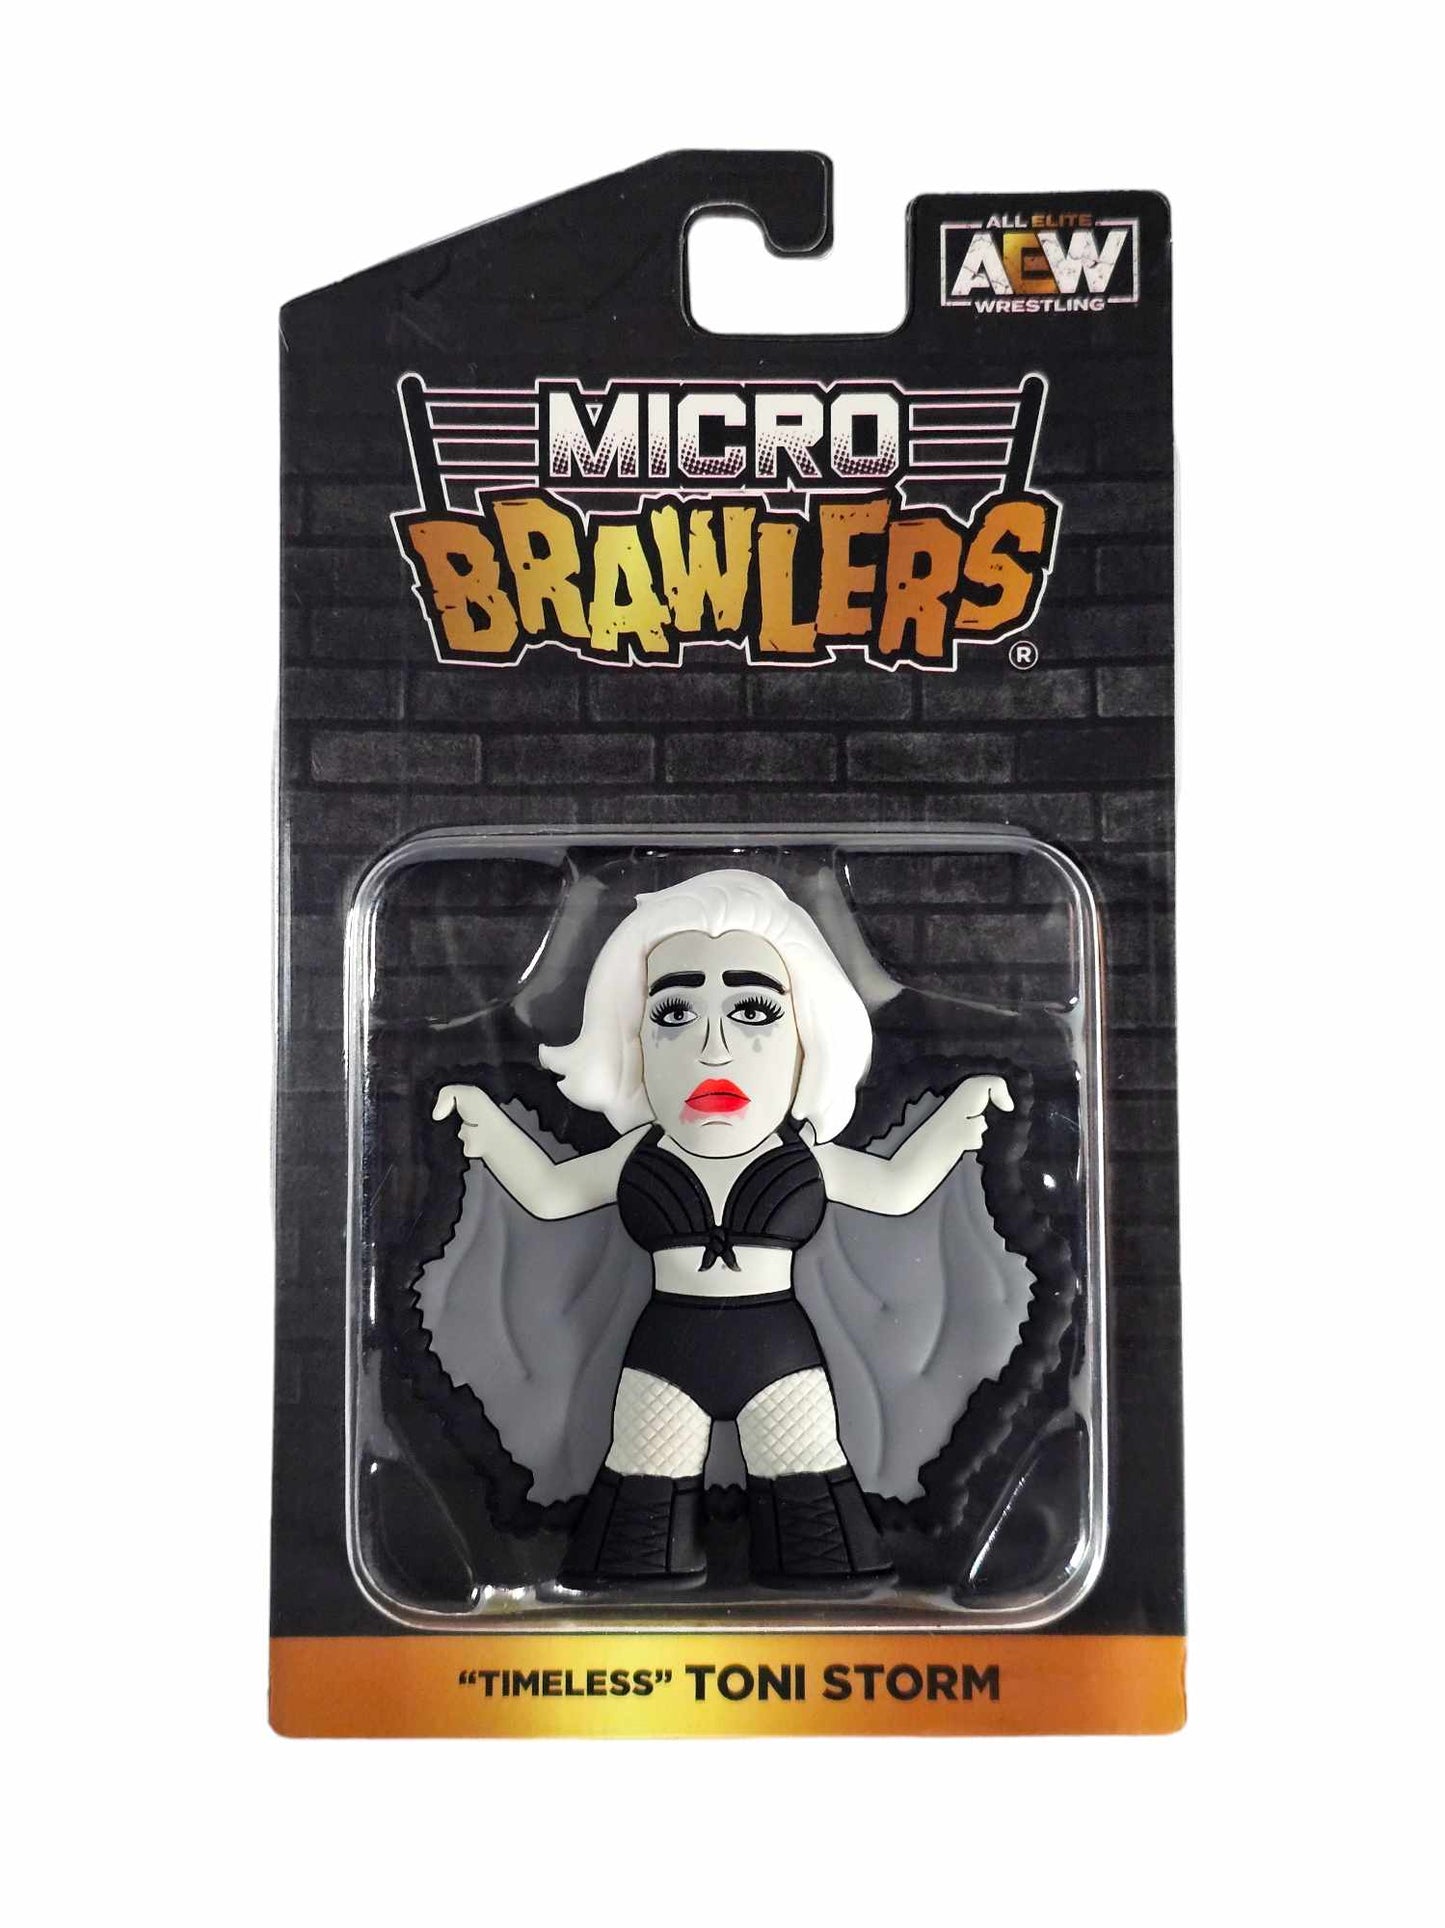 Here's an up close look at the FTR AEW Micro Brawlers. Pre-Orders